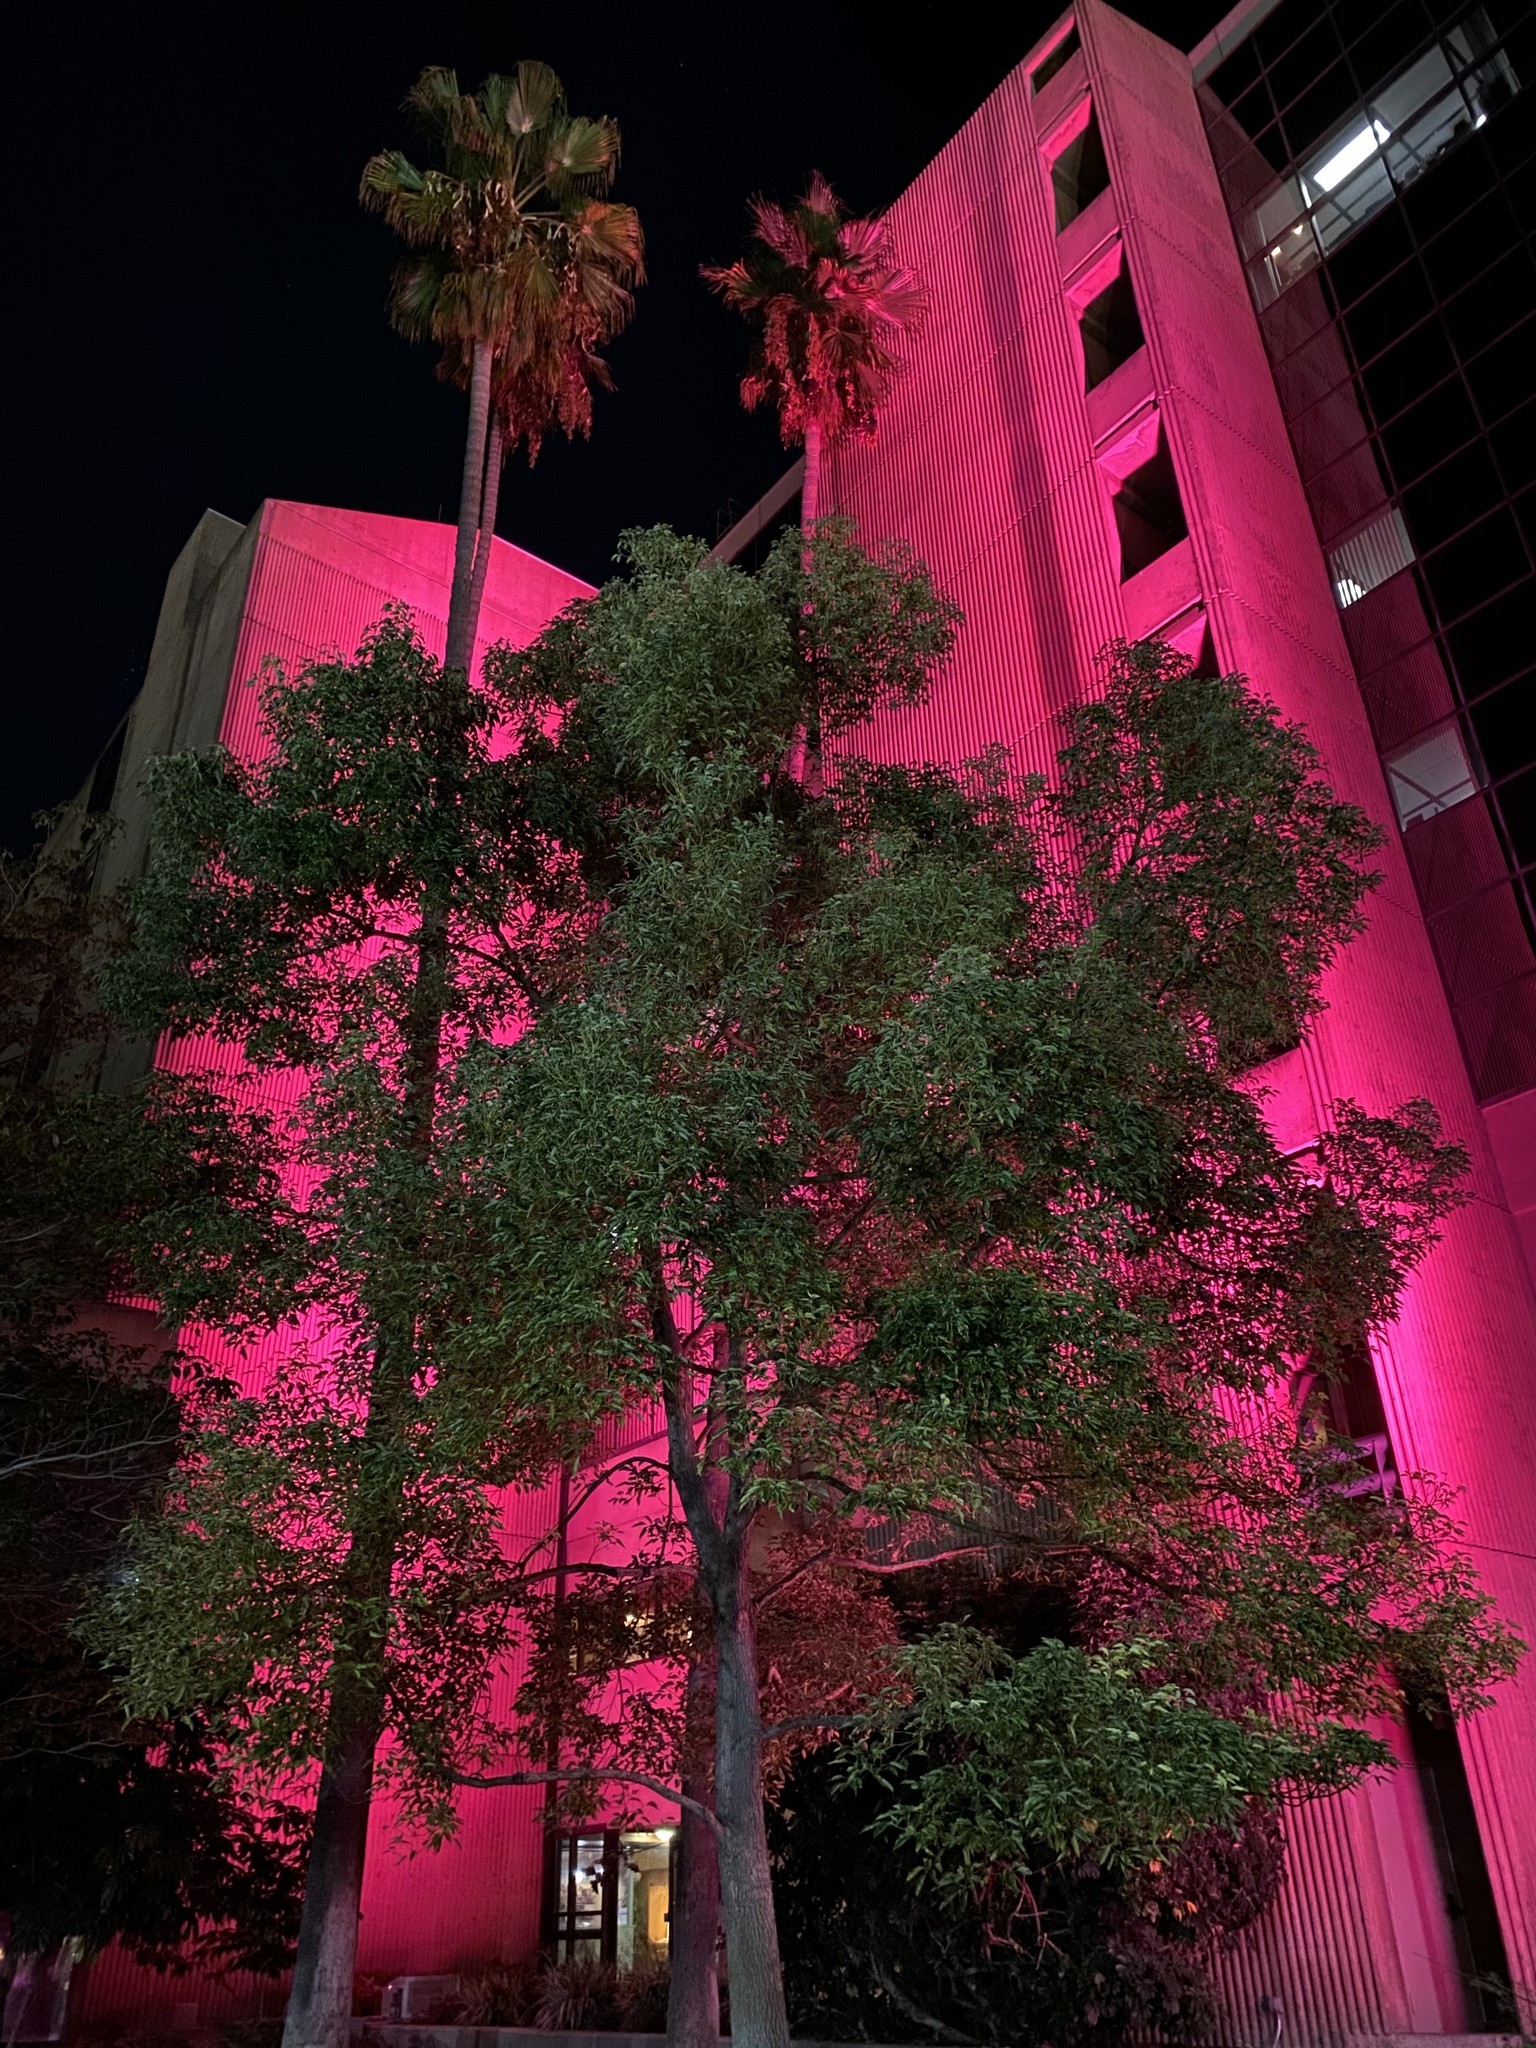 Tree in front of lighted up building